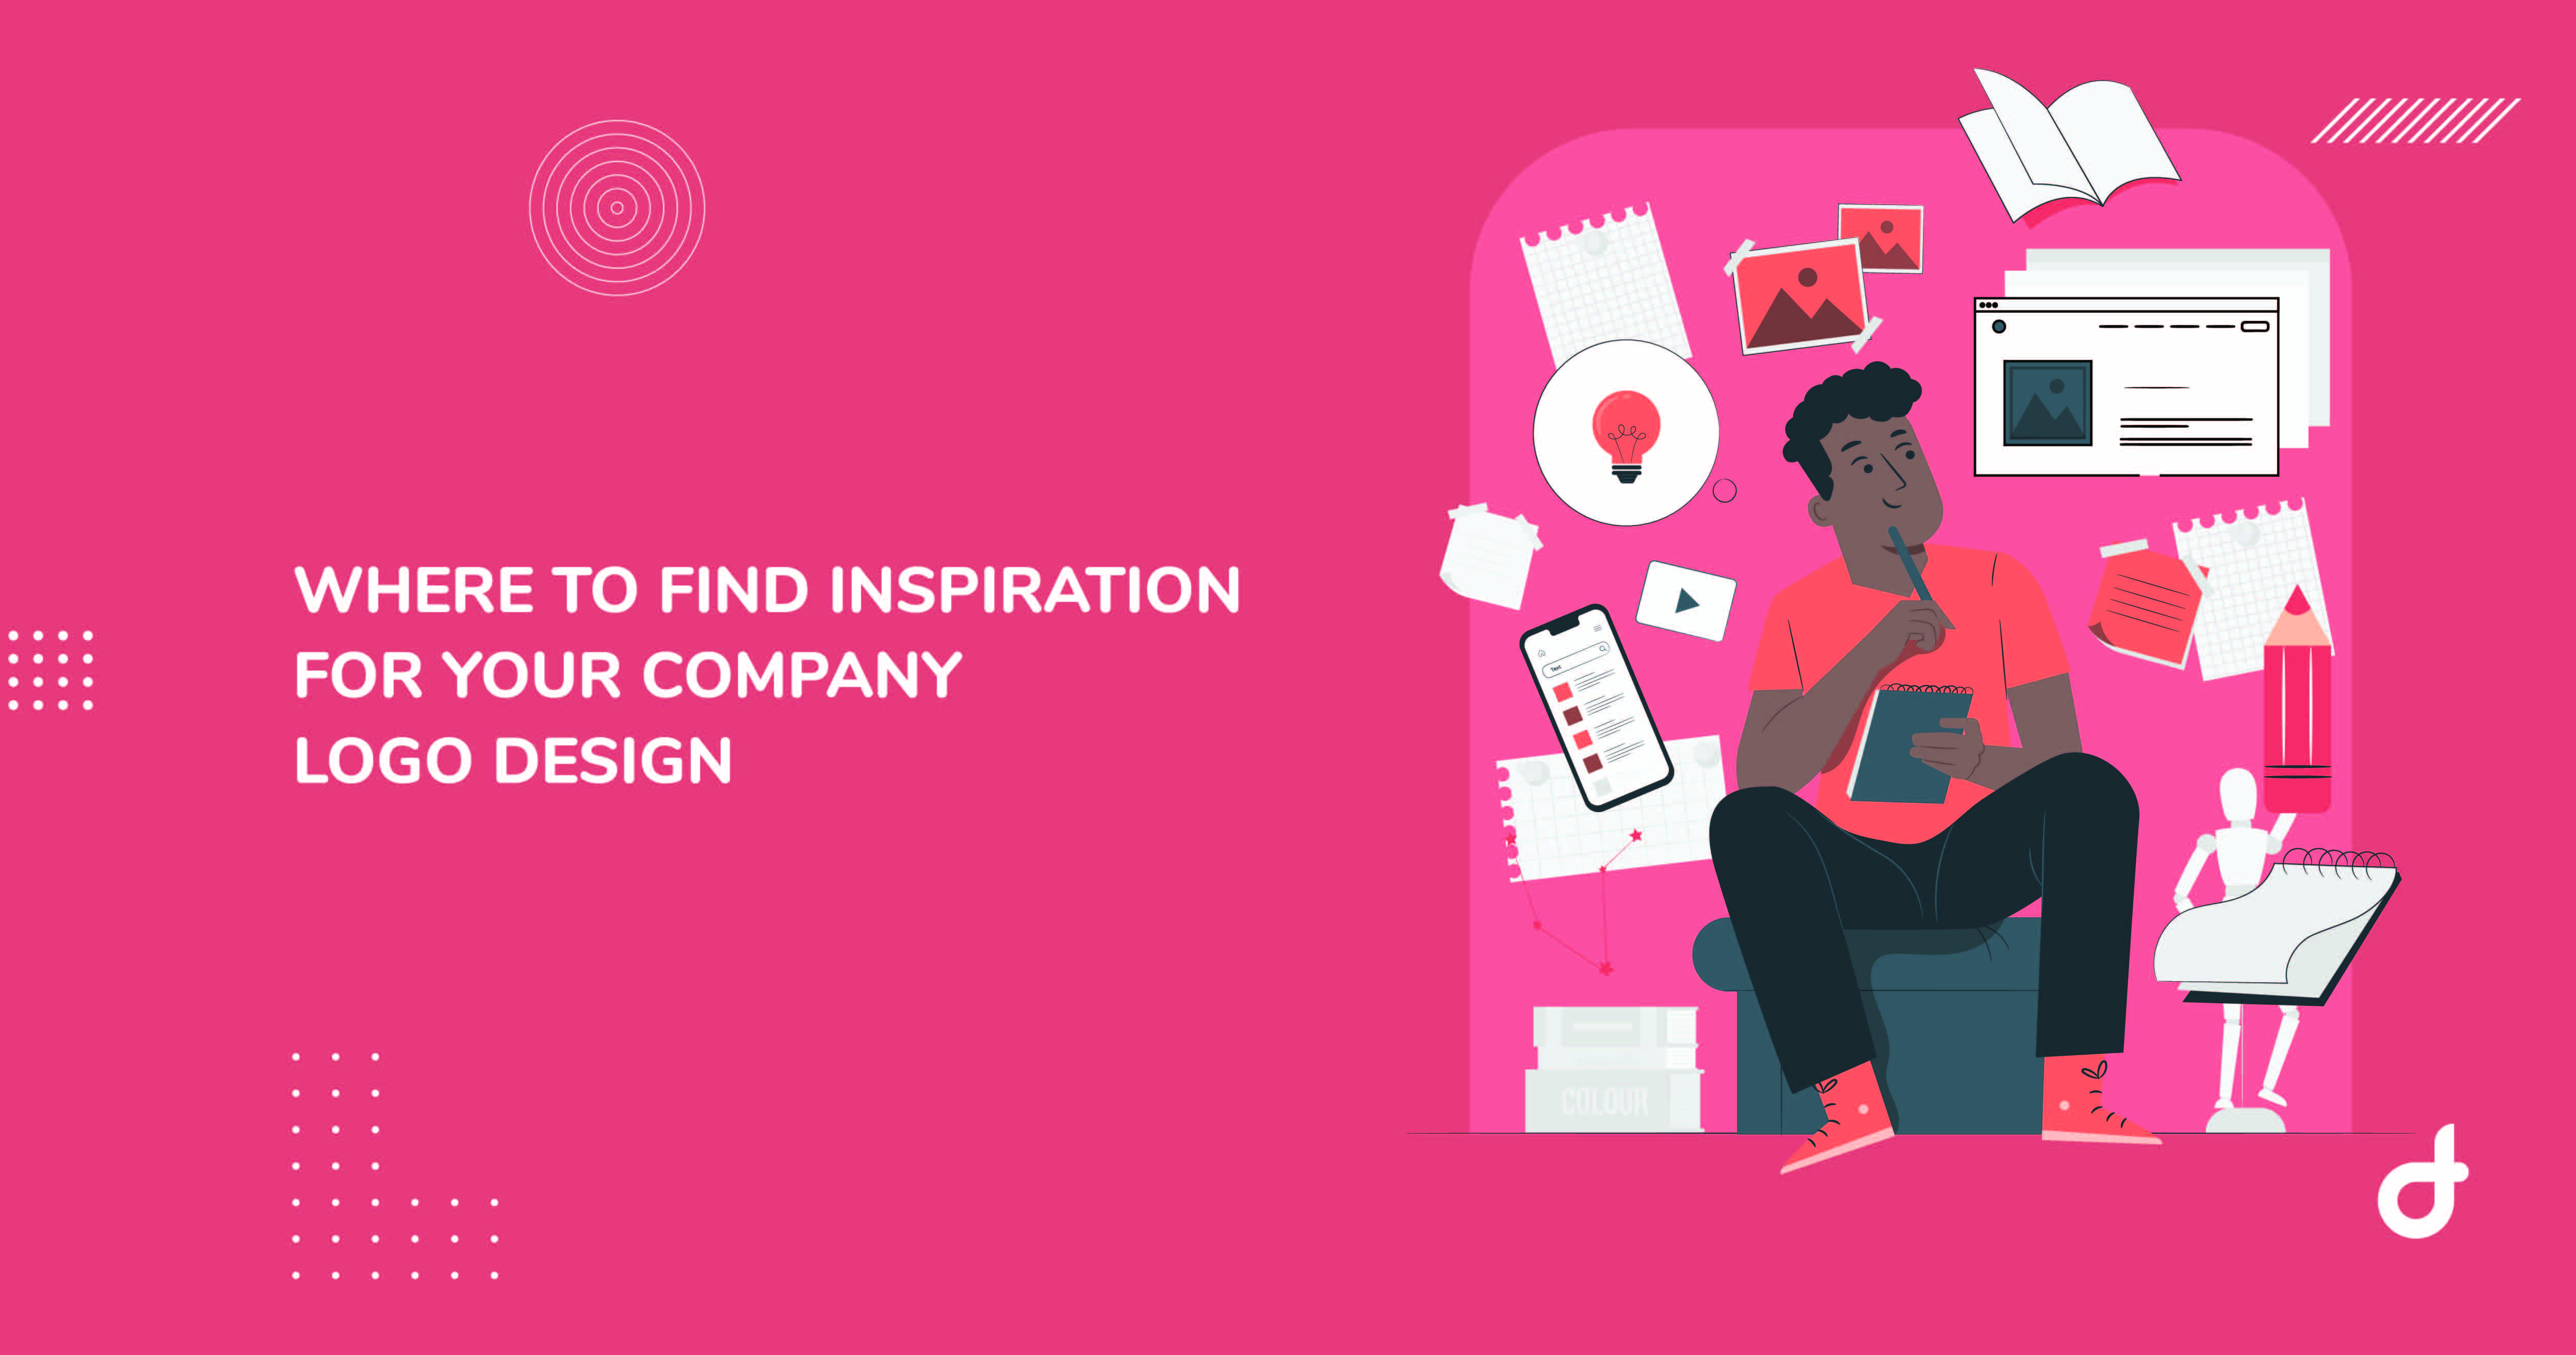 Where to Find Inspiration for Your Company Logo Design